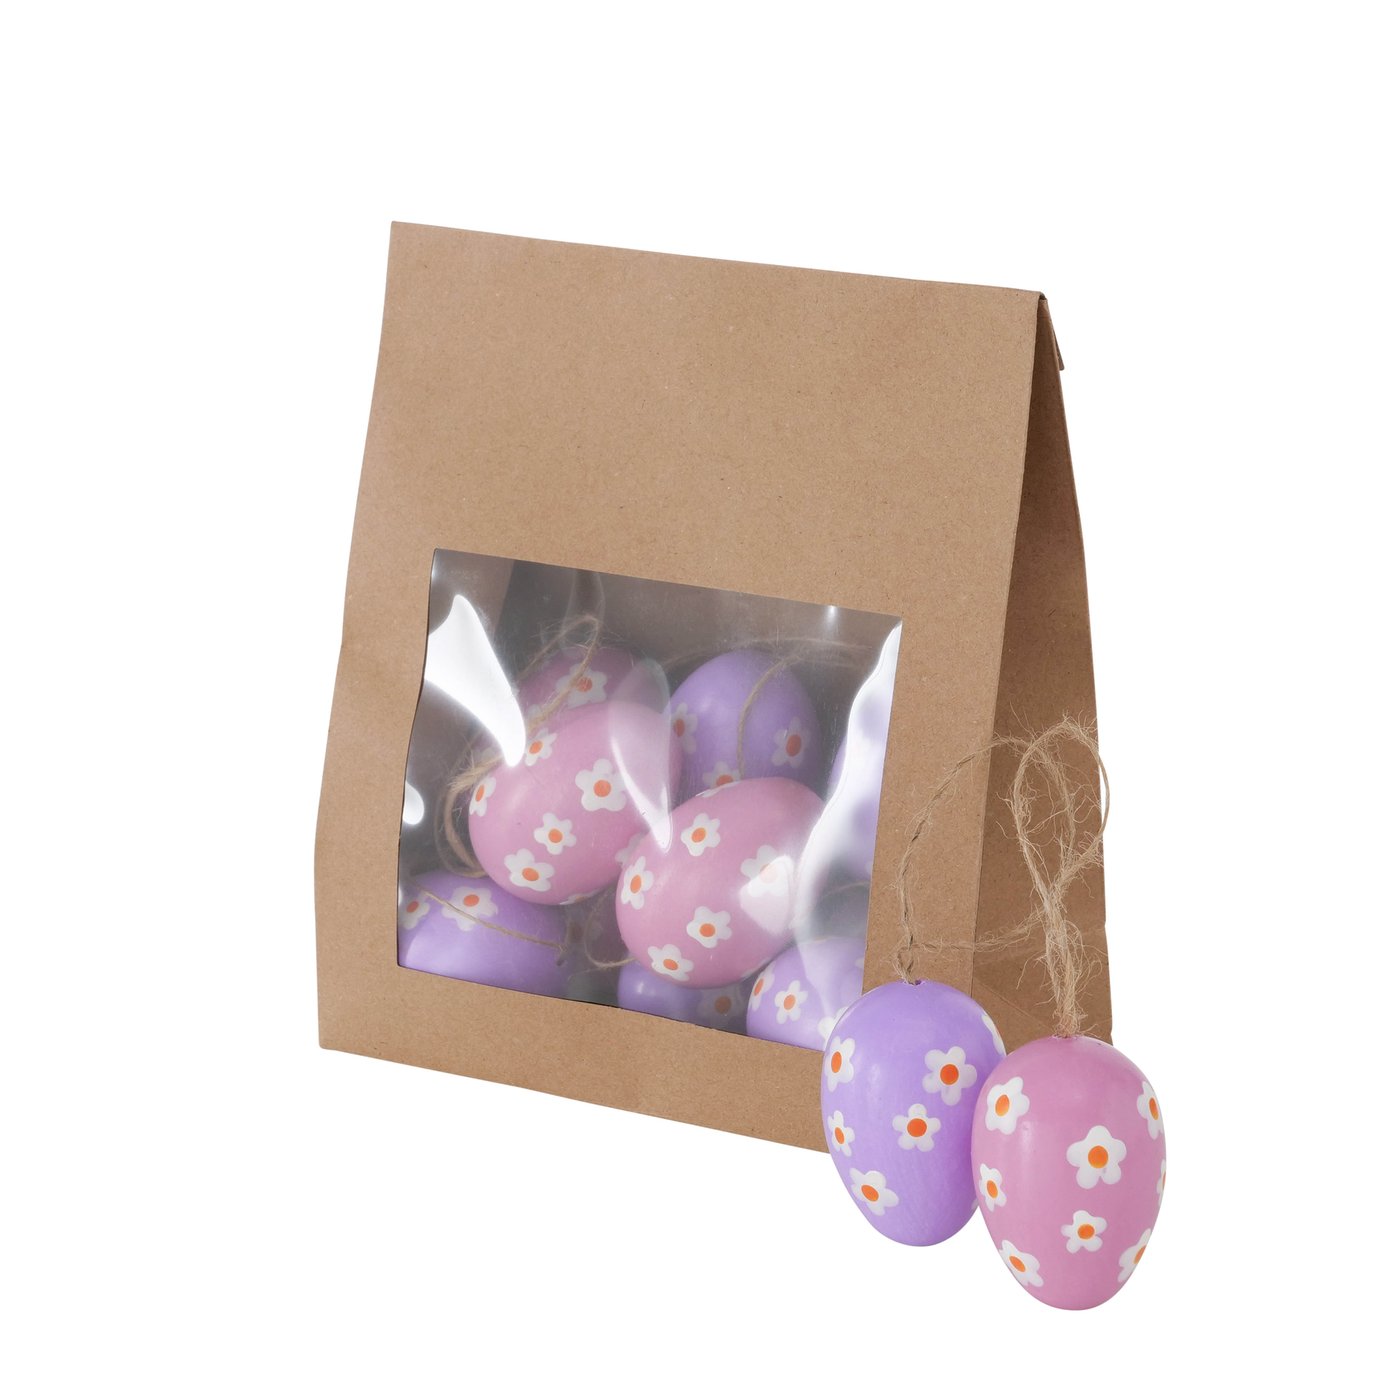 &Quirky Flower Hanging Egg Decorations: Pack of 12